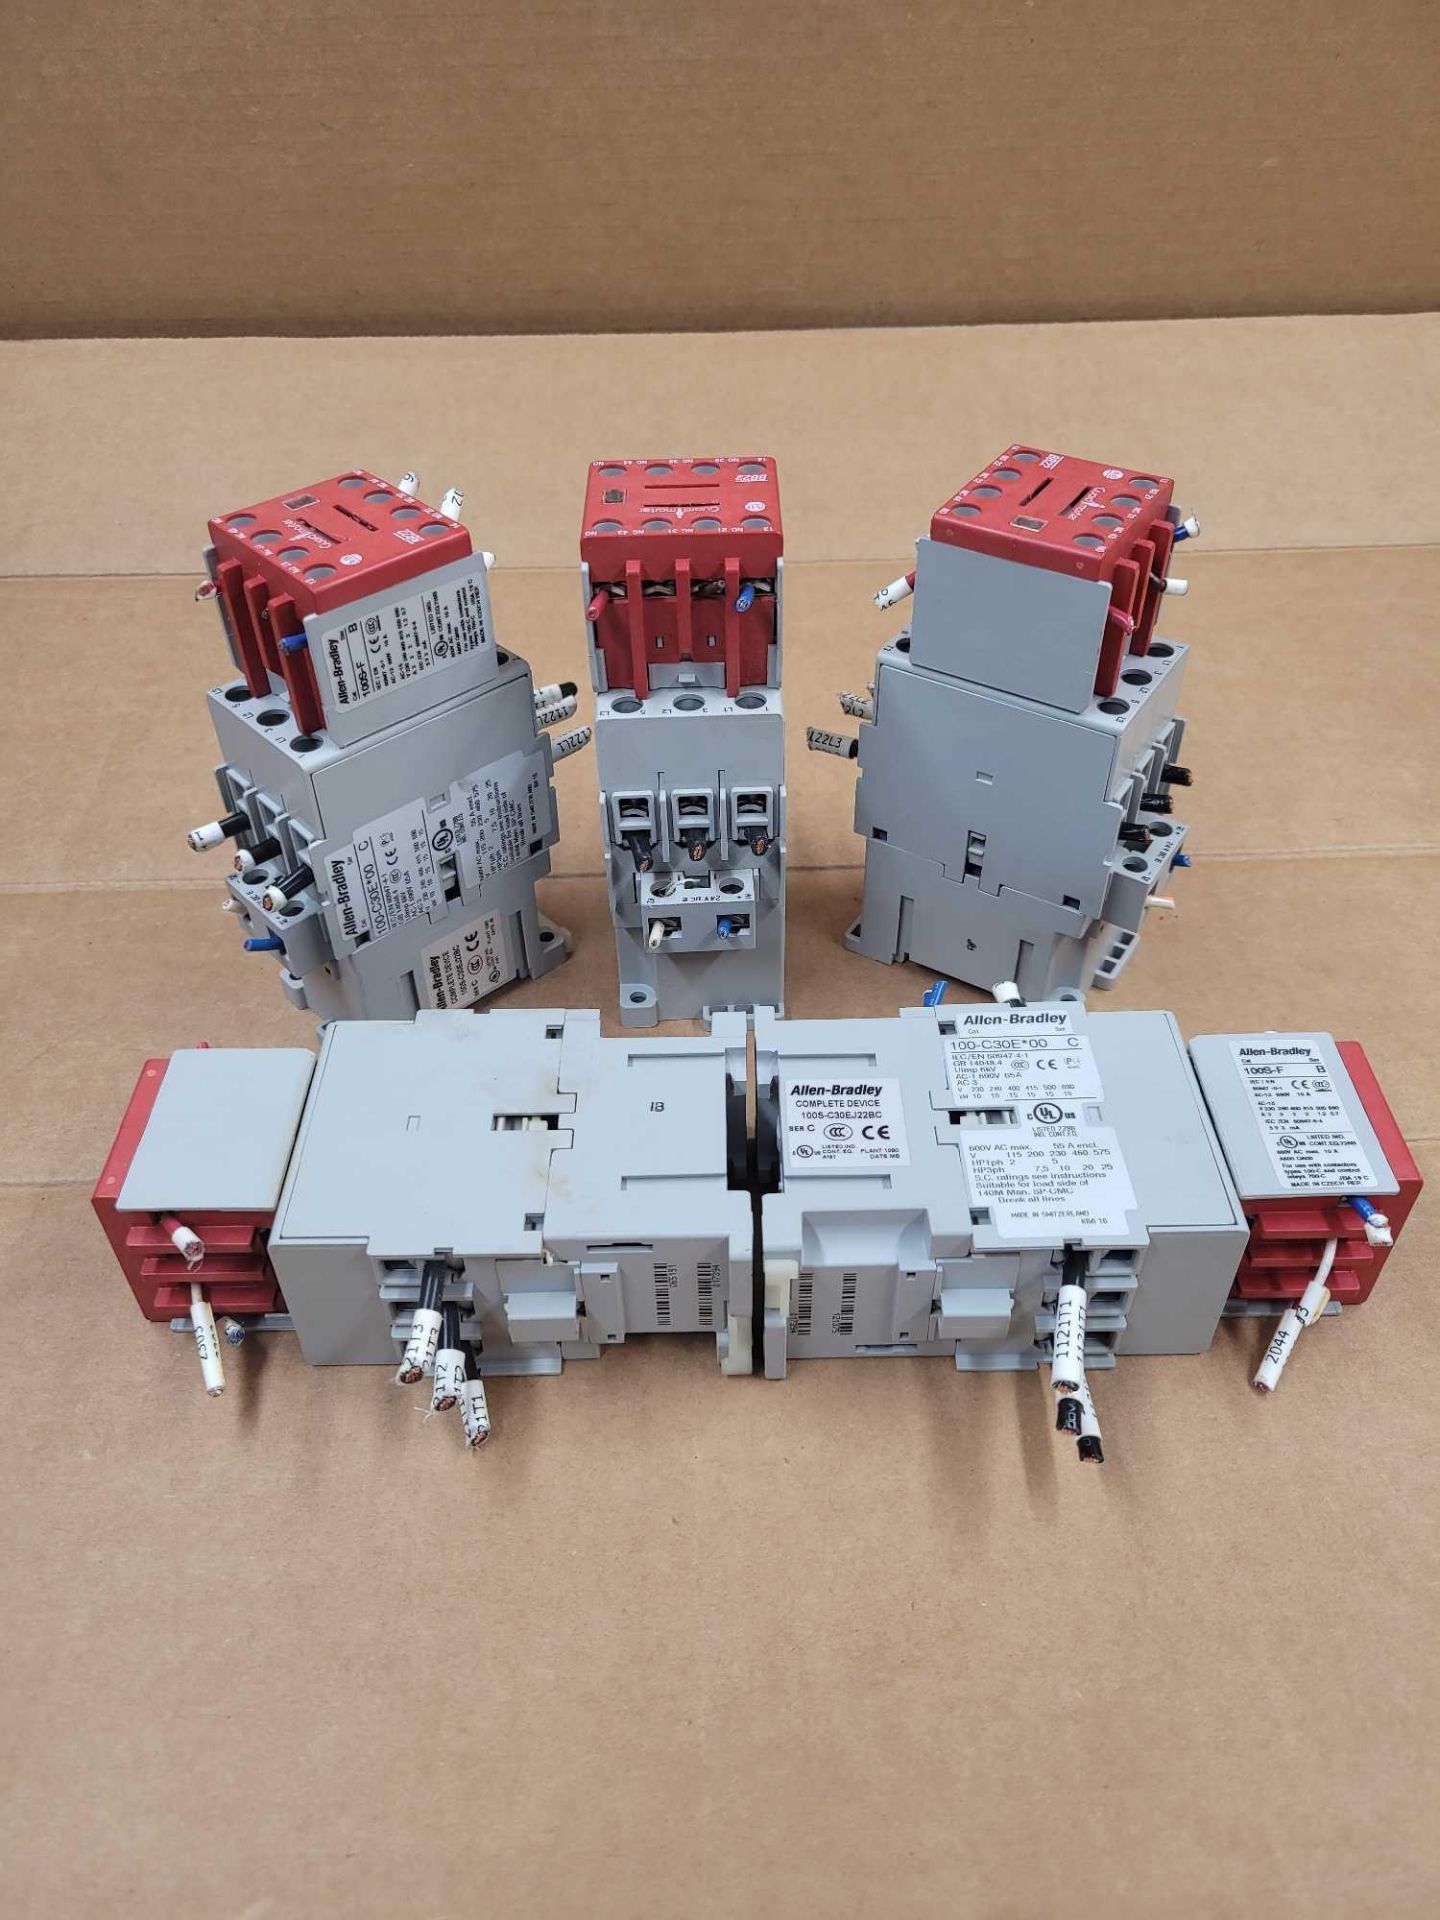 LOT OF 5 ALLEN BRADLEY 100S-C30EJ22BC / Series C Guardmaster Safety Contactor  /  Lot Weight: 6.0 lb - Image 8 of 8